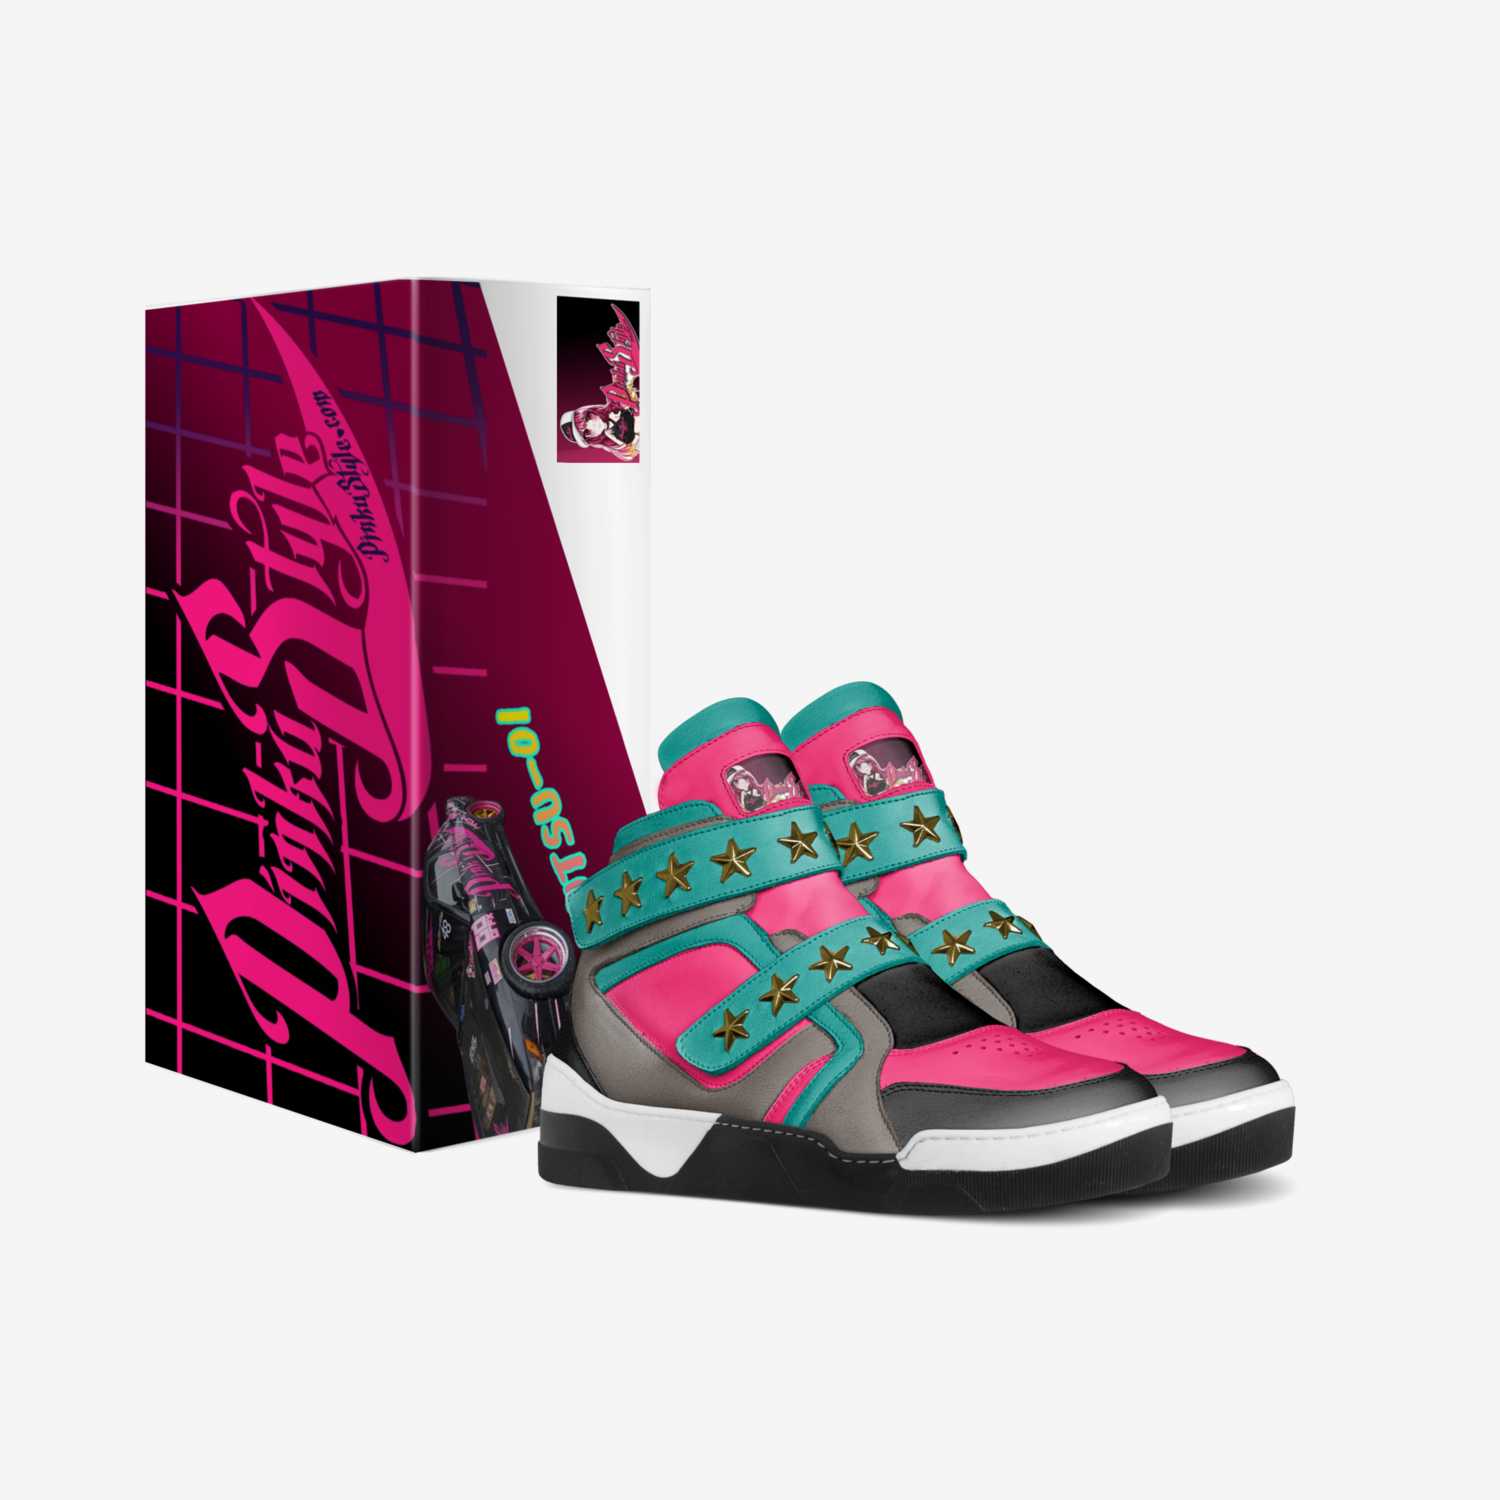 Pinkutsu-01s custom made in Italy shoes by Donald Jackson Jr. | Box view